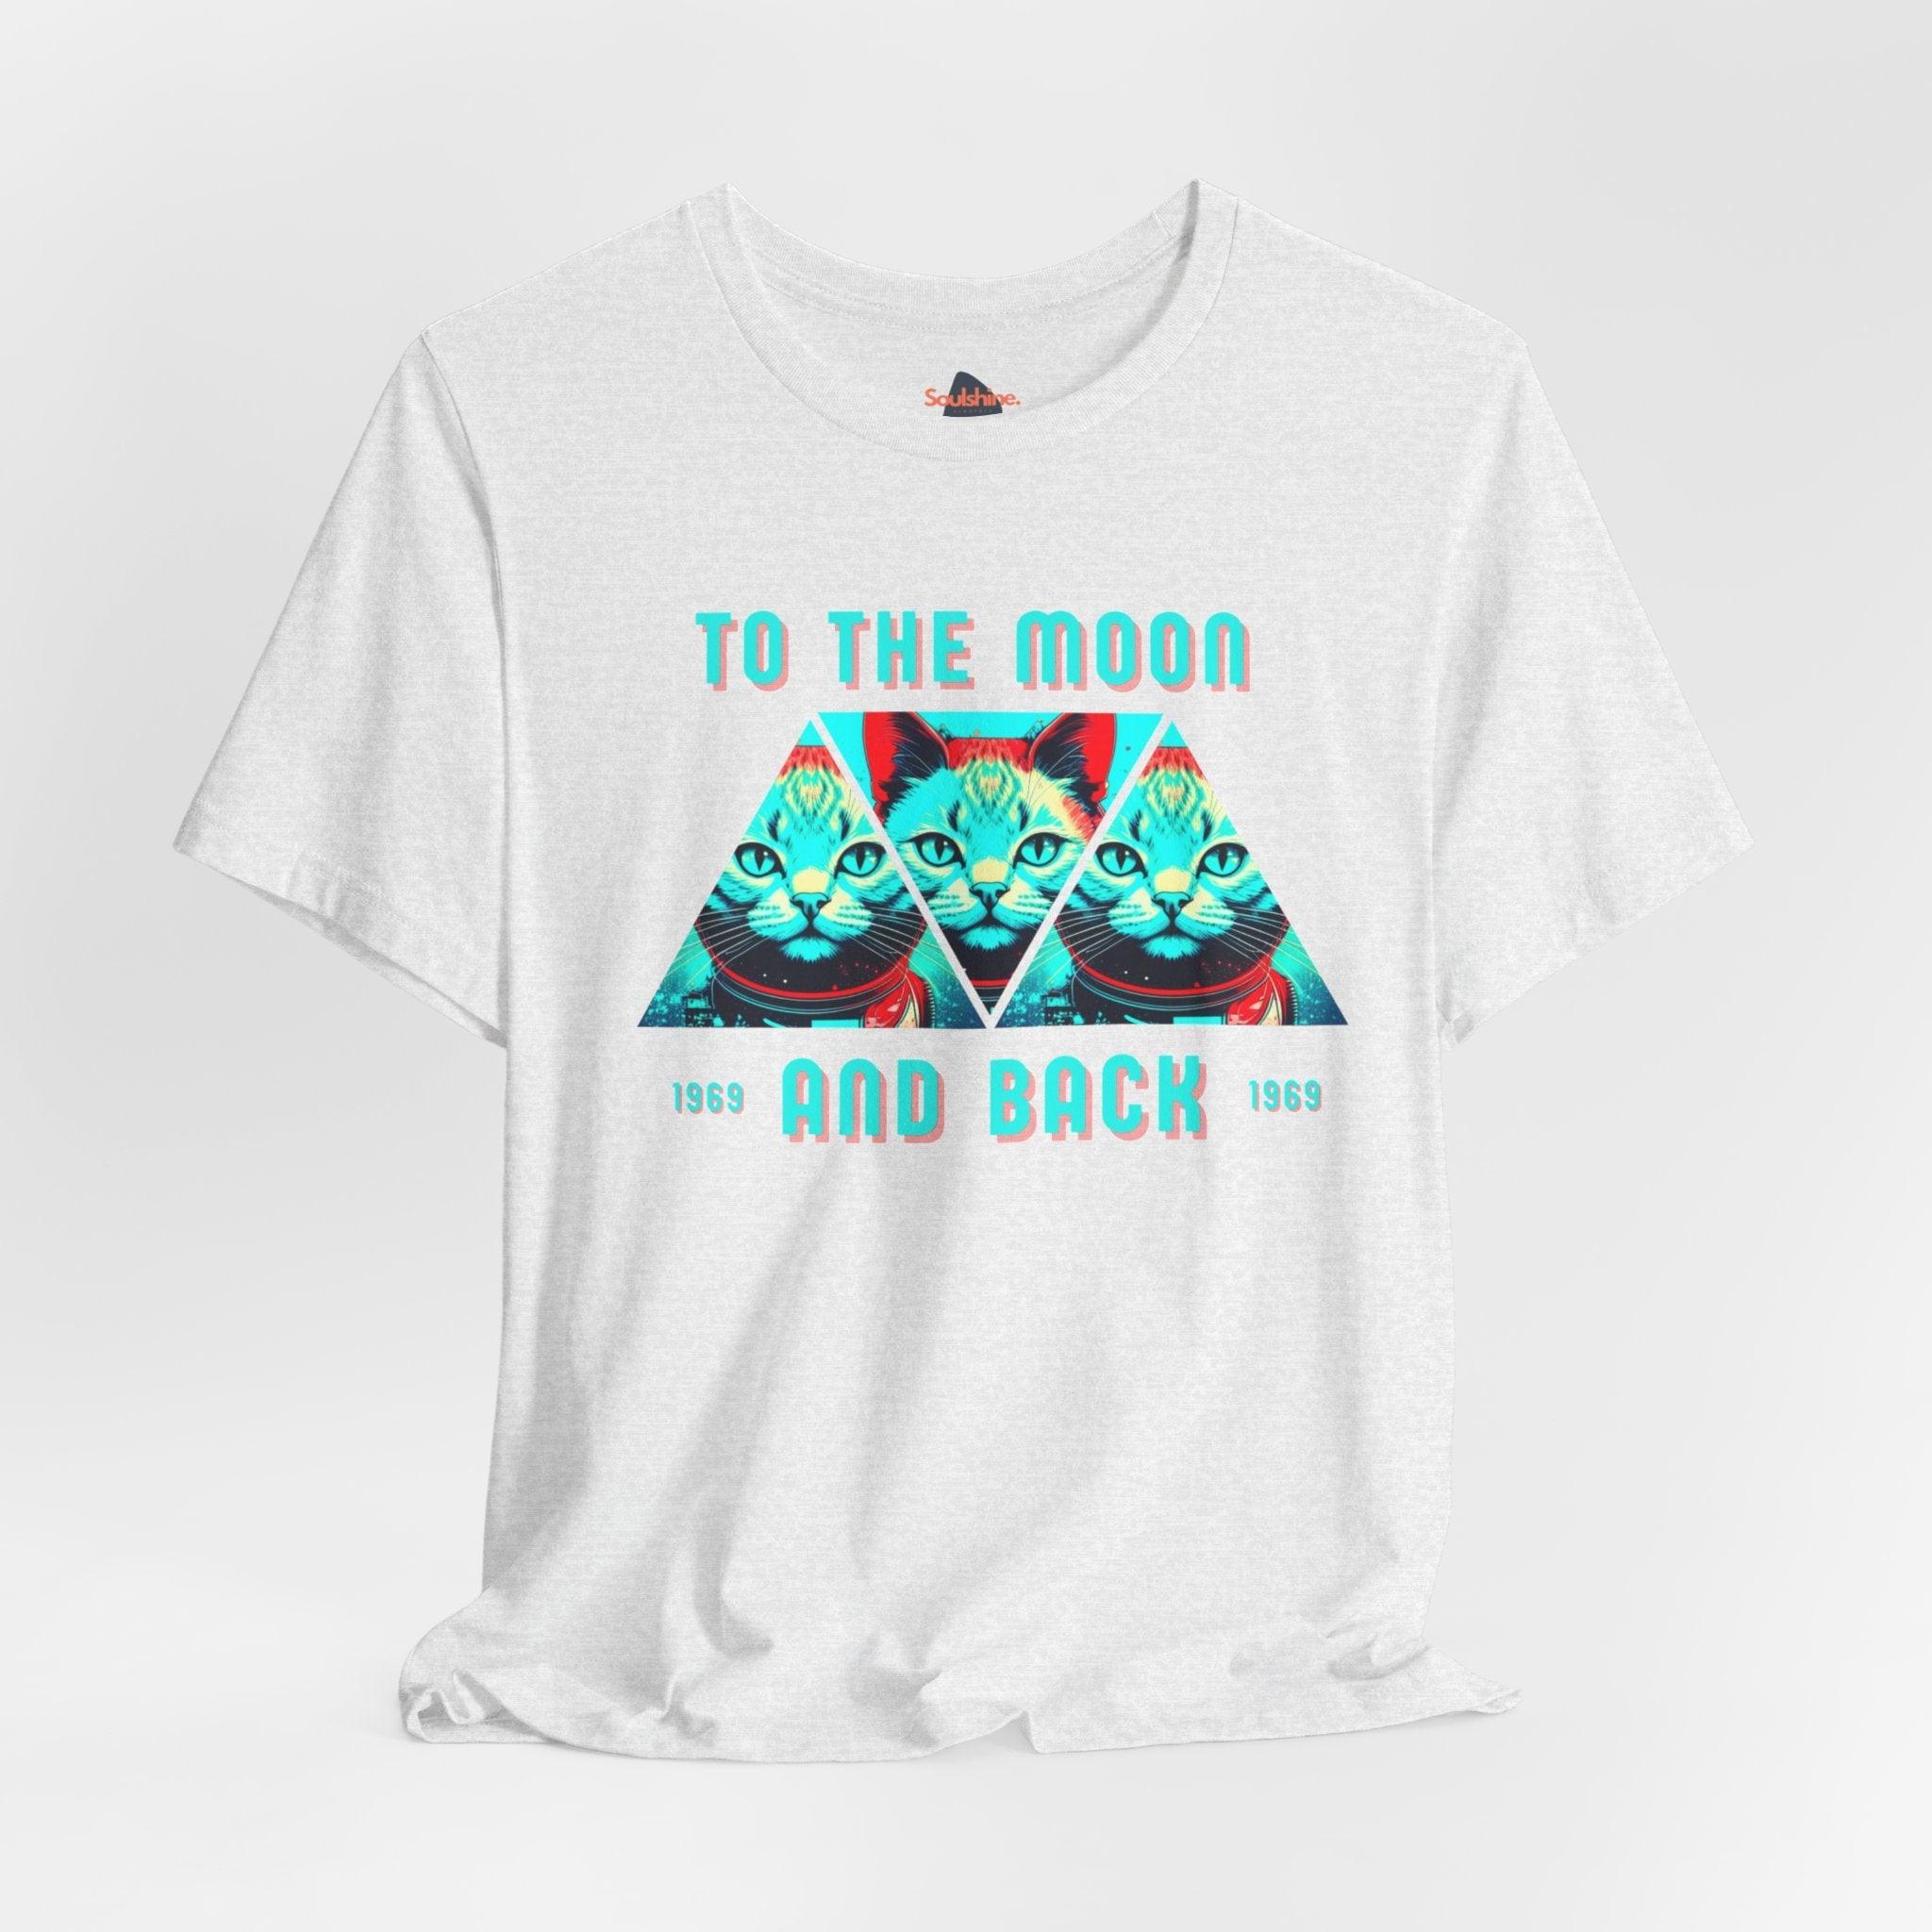 To the moon and back - Soulshinecreators - Unisex Jersey Short Sleeve Tee - US Ash S T-Shirt by Soulshinecreators | Soulshinecreators